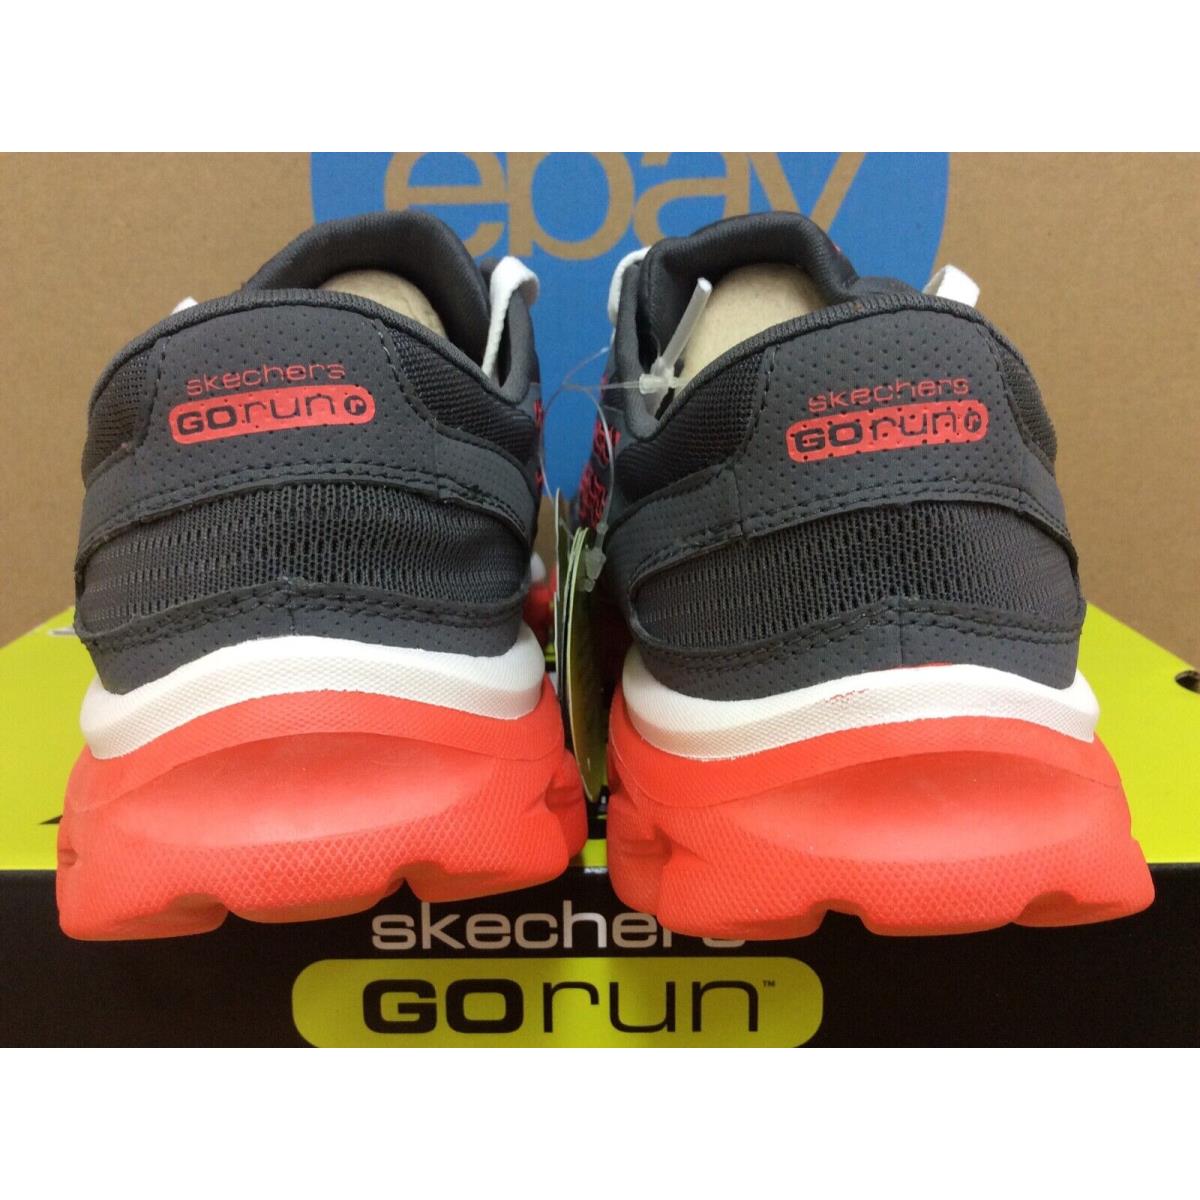 Skechers shoes Run Ride - Charcoal Coral 8